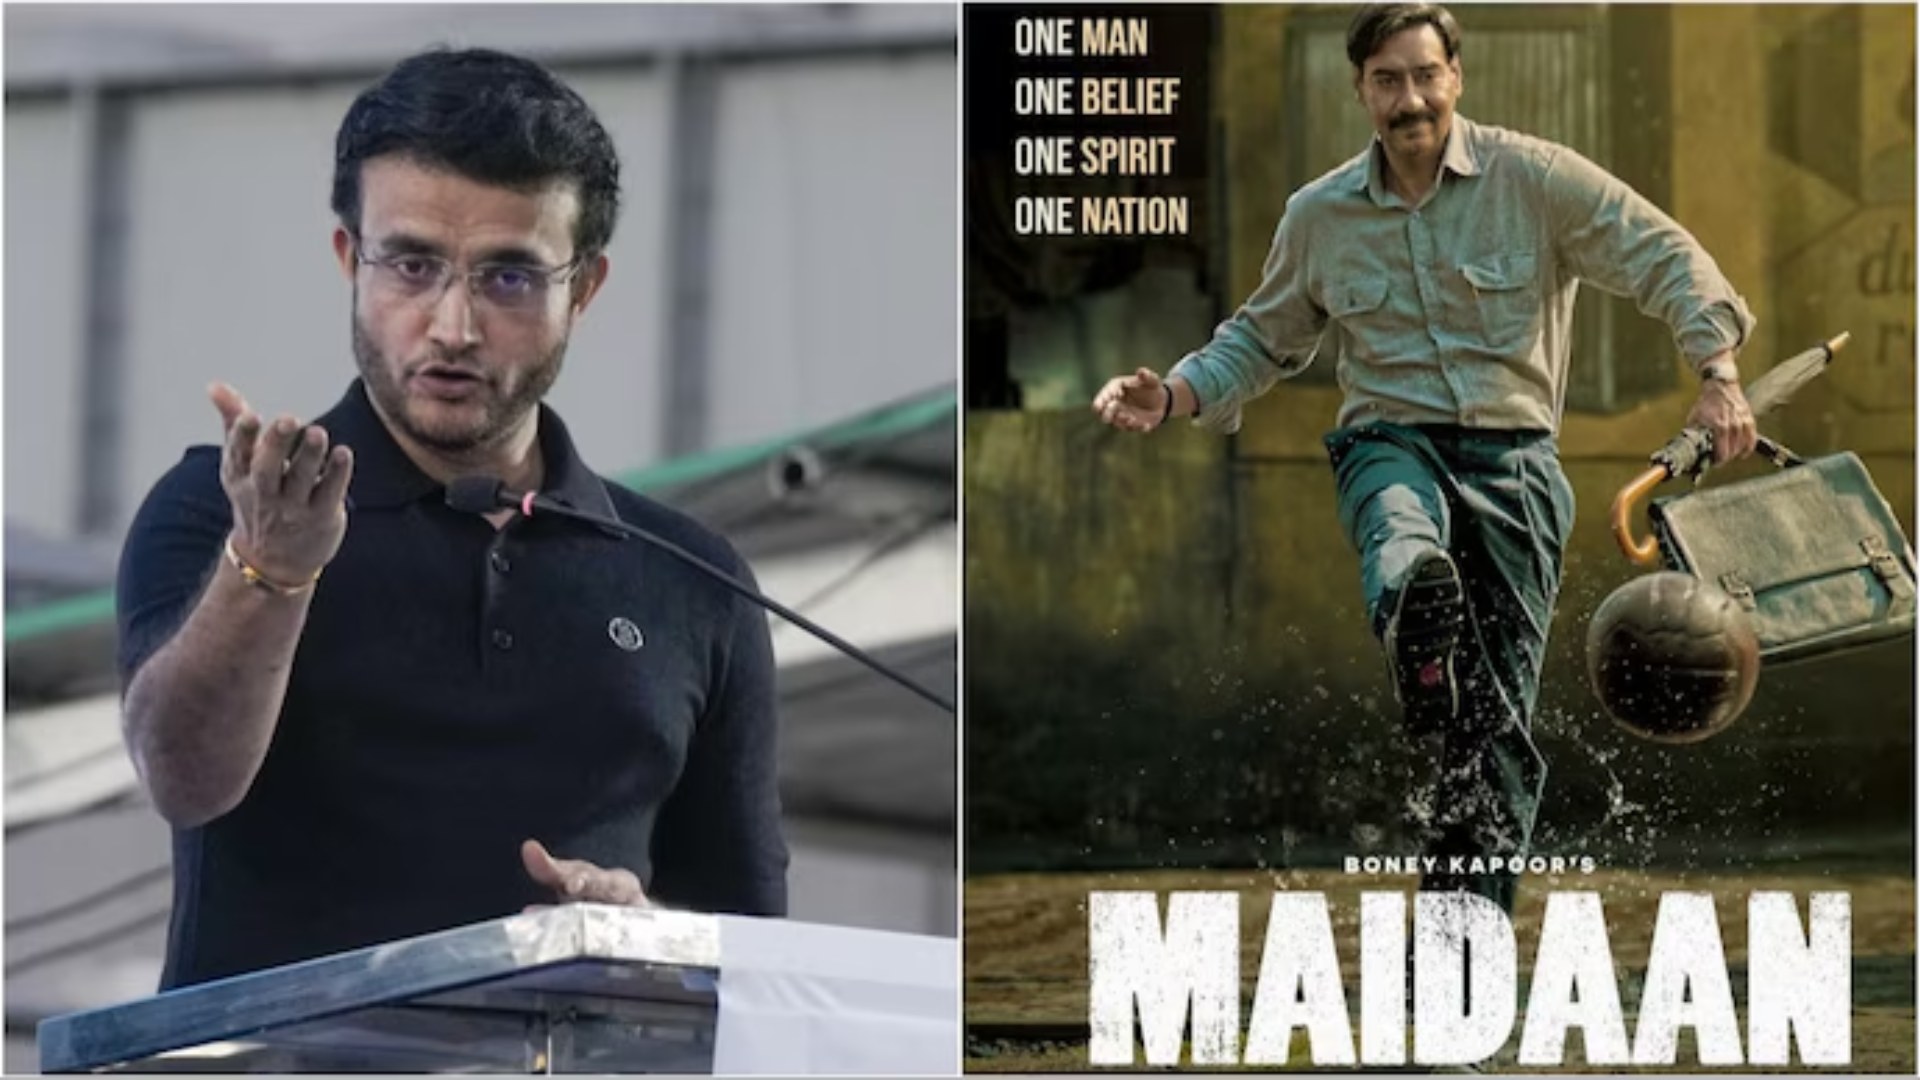 Sourav Ganguly Applauds ‘Maidaan’, Calls It a Captivating Tribute to Indian Football Legacy